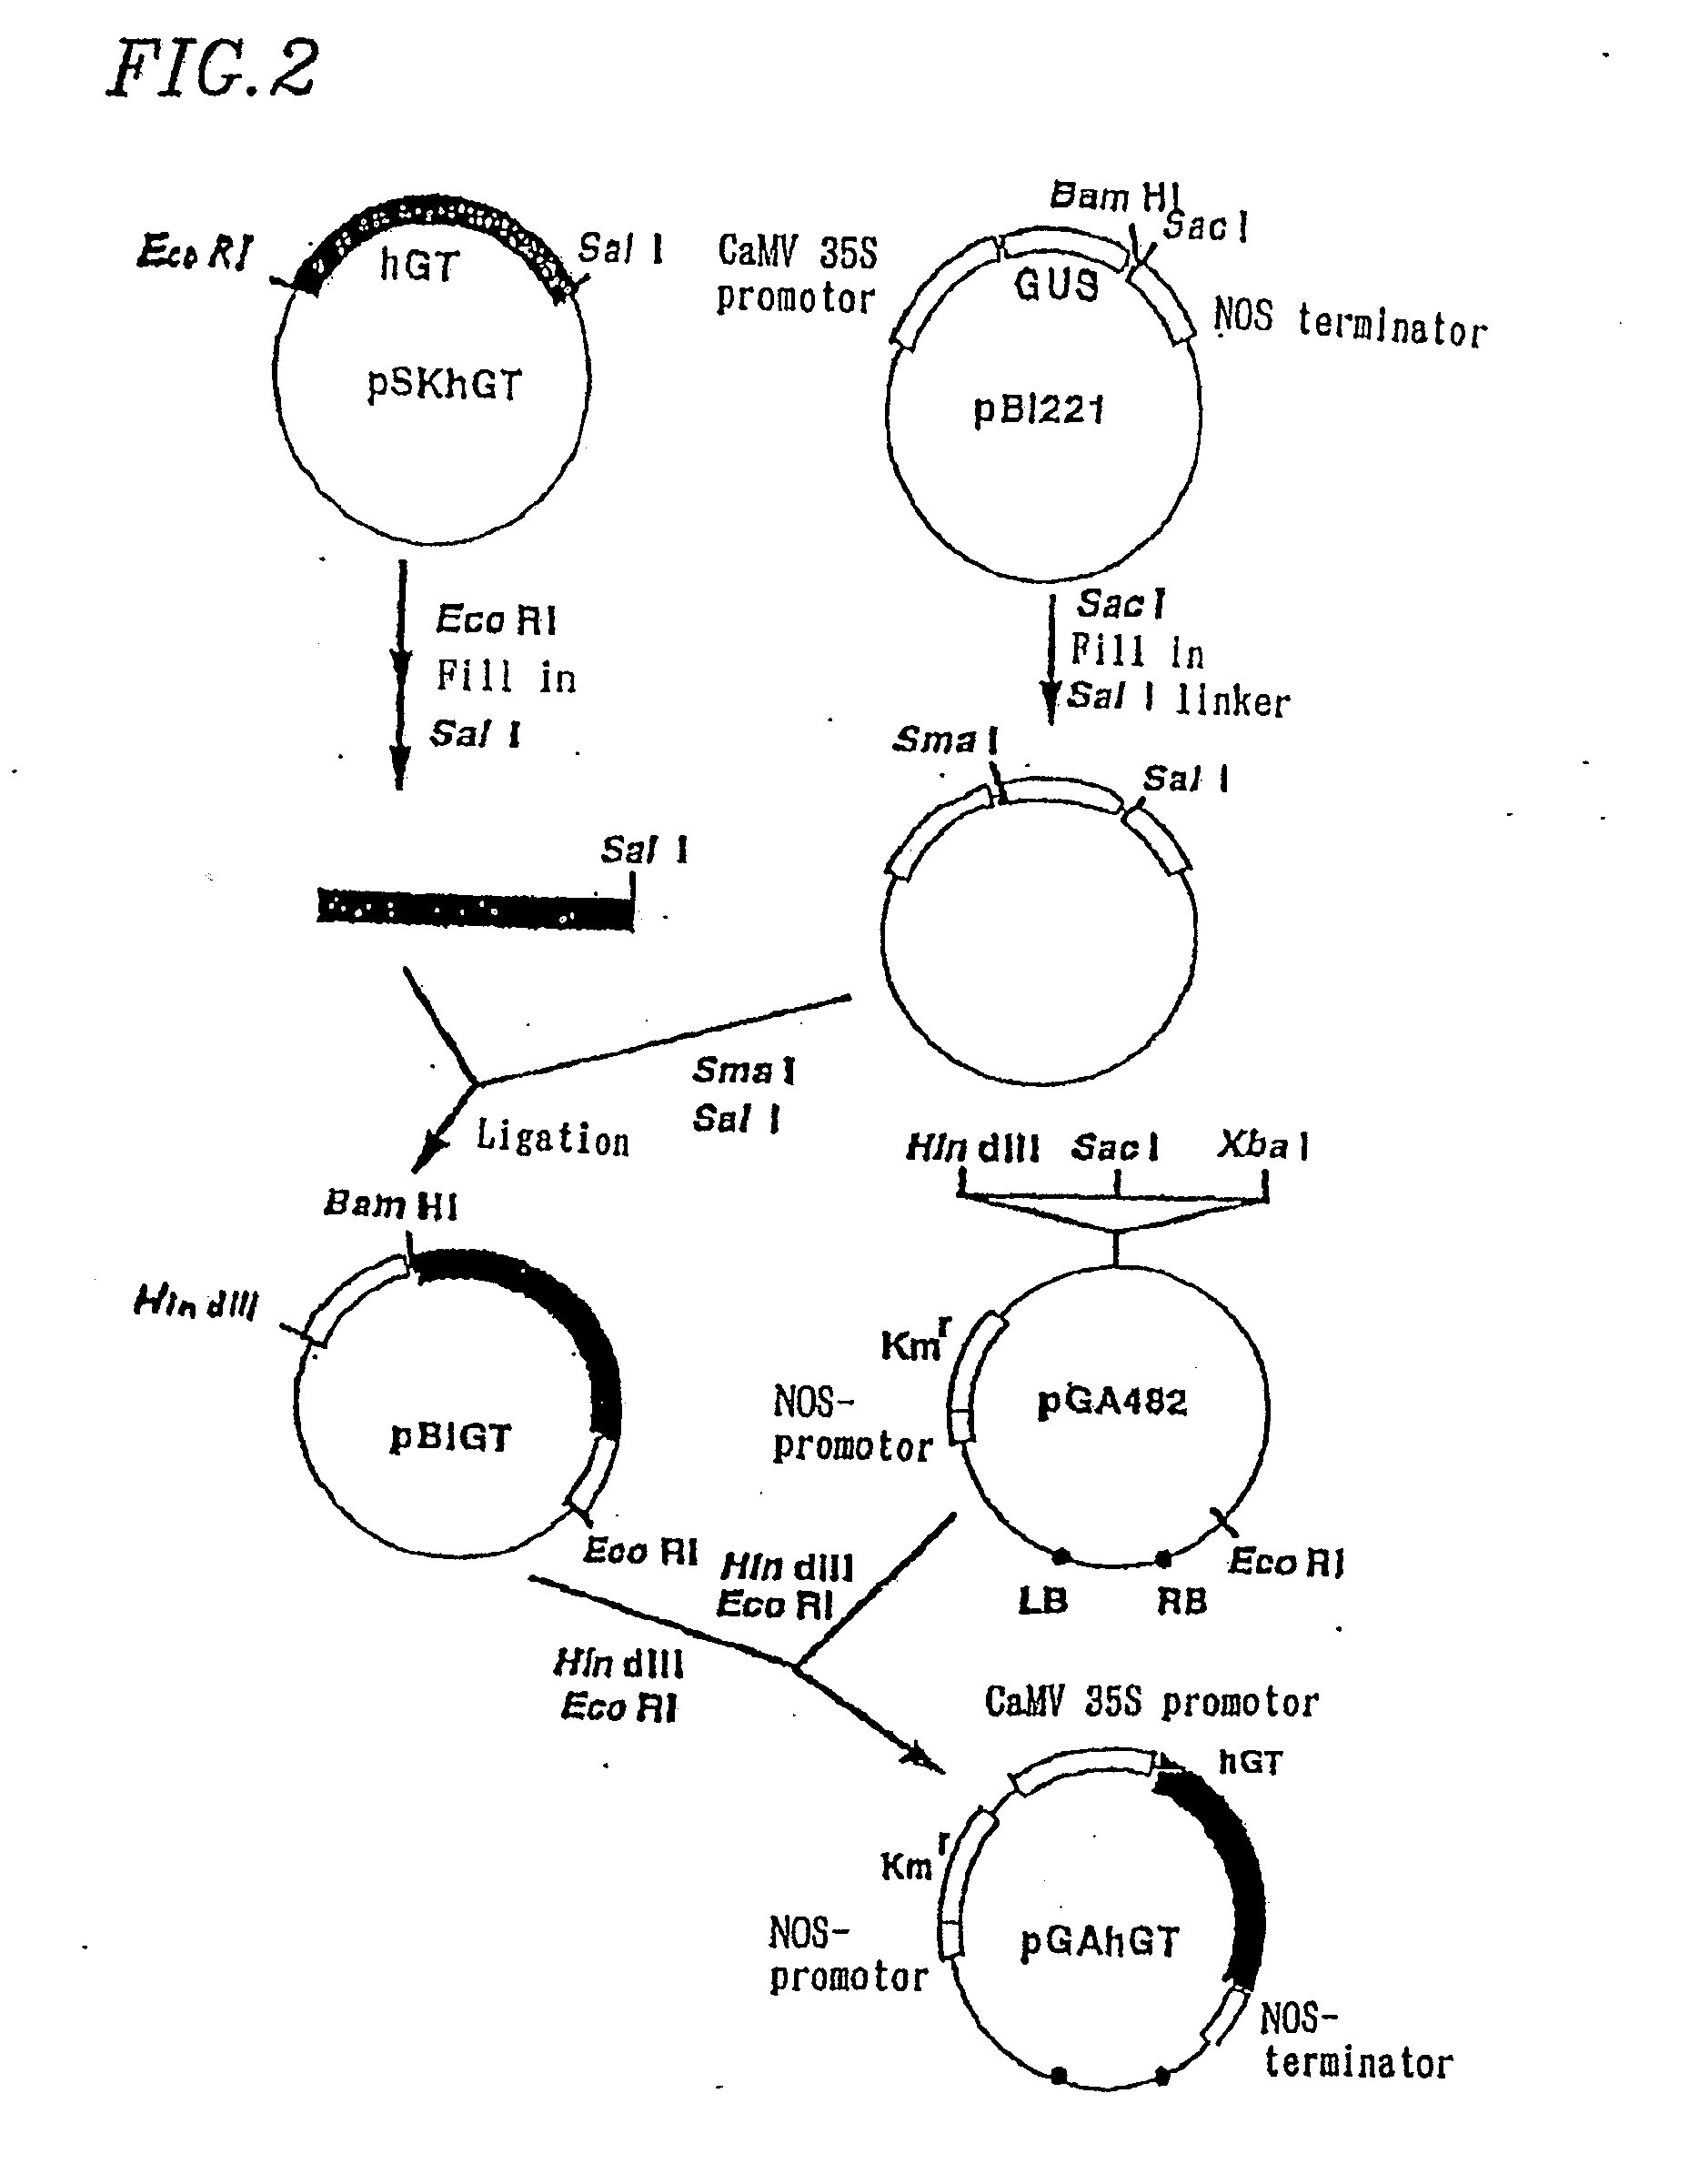 Method For Secretory Production of Glycoprotein Having Human-Type Sugar Chain Using Plant Cell